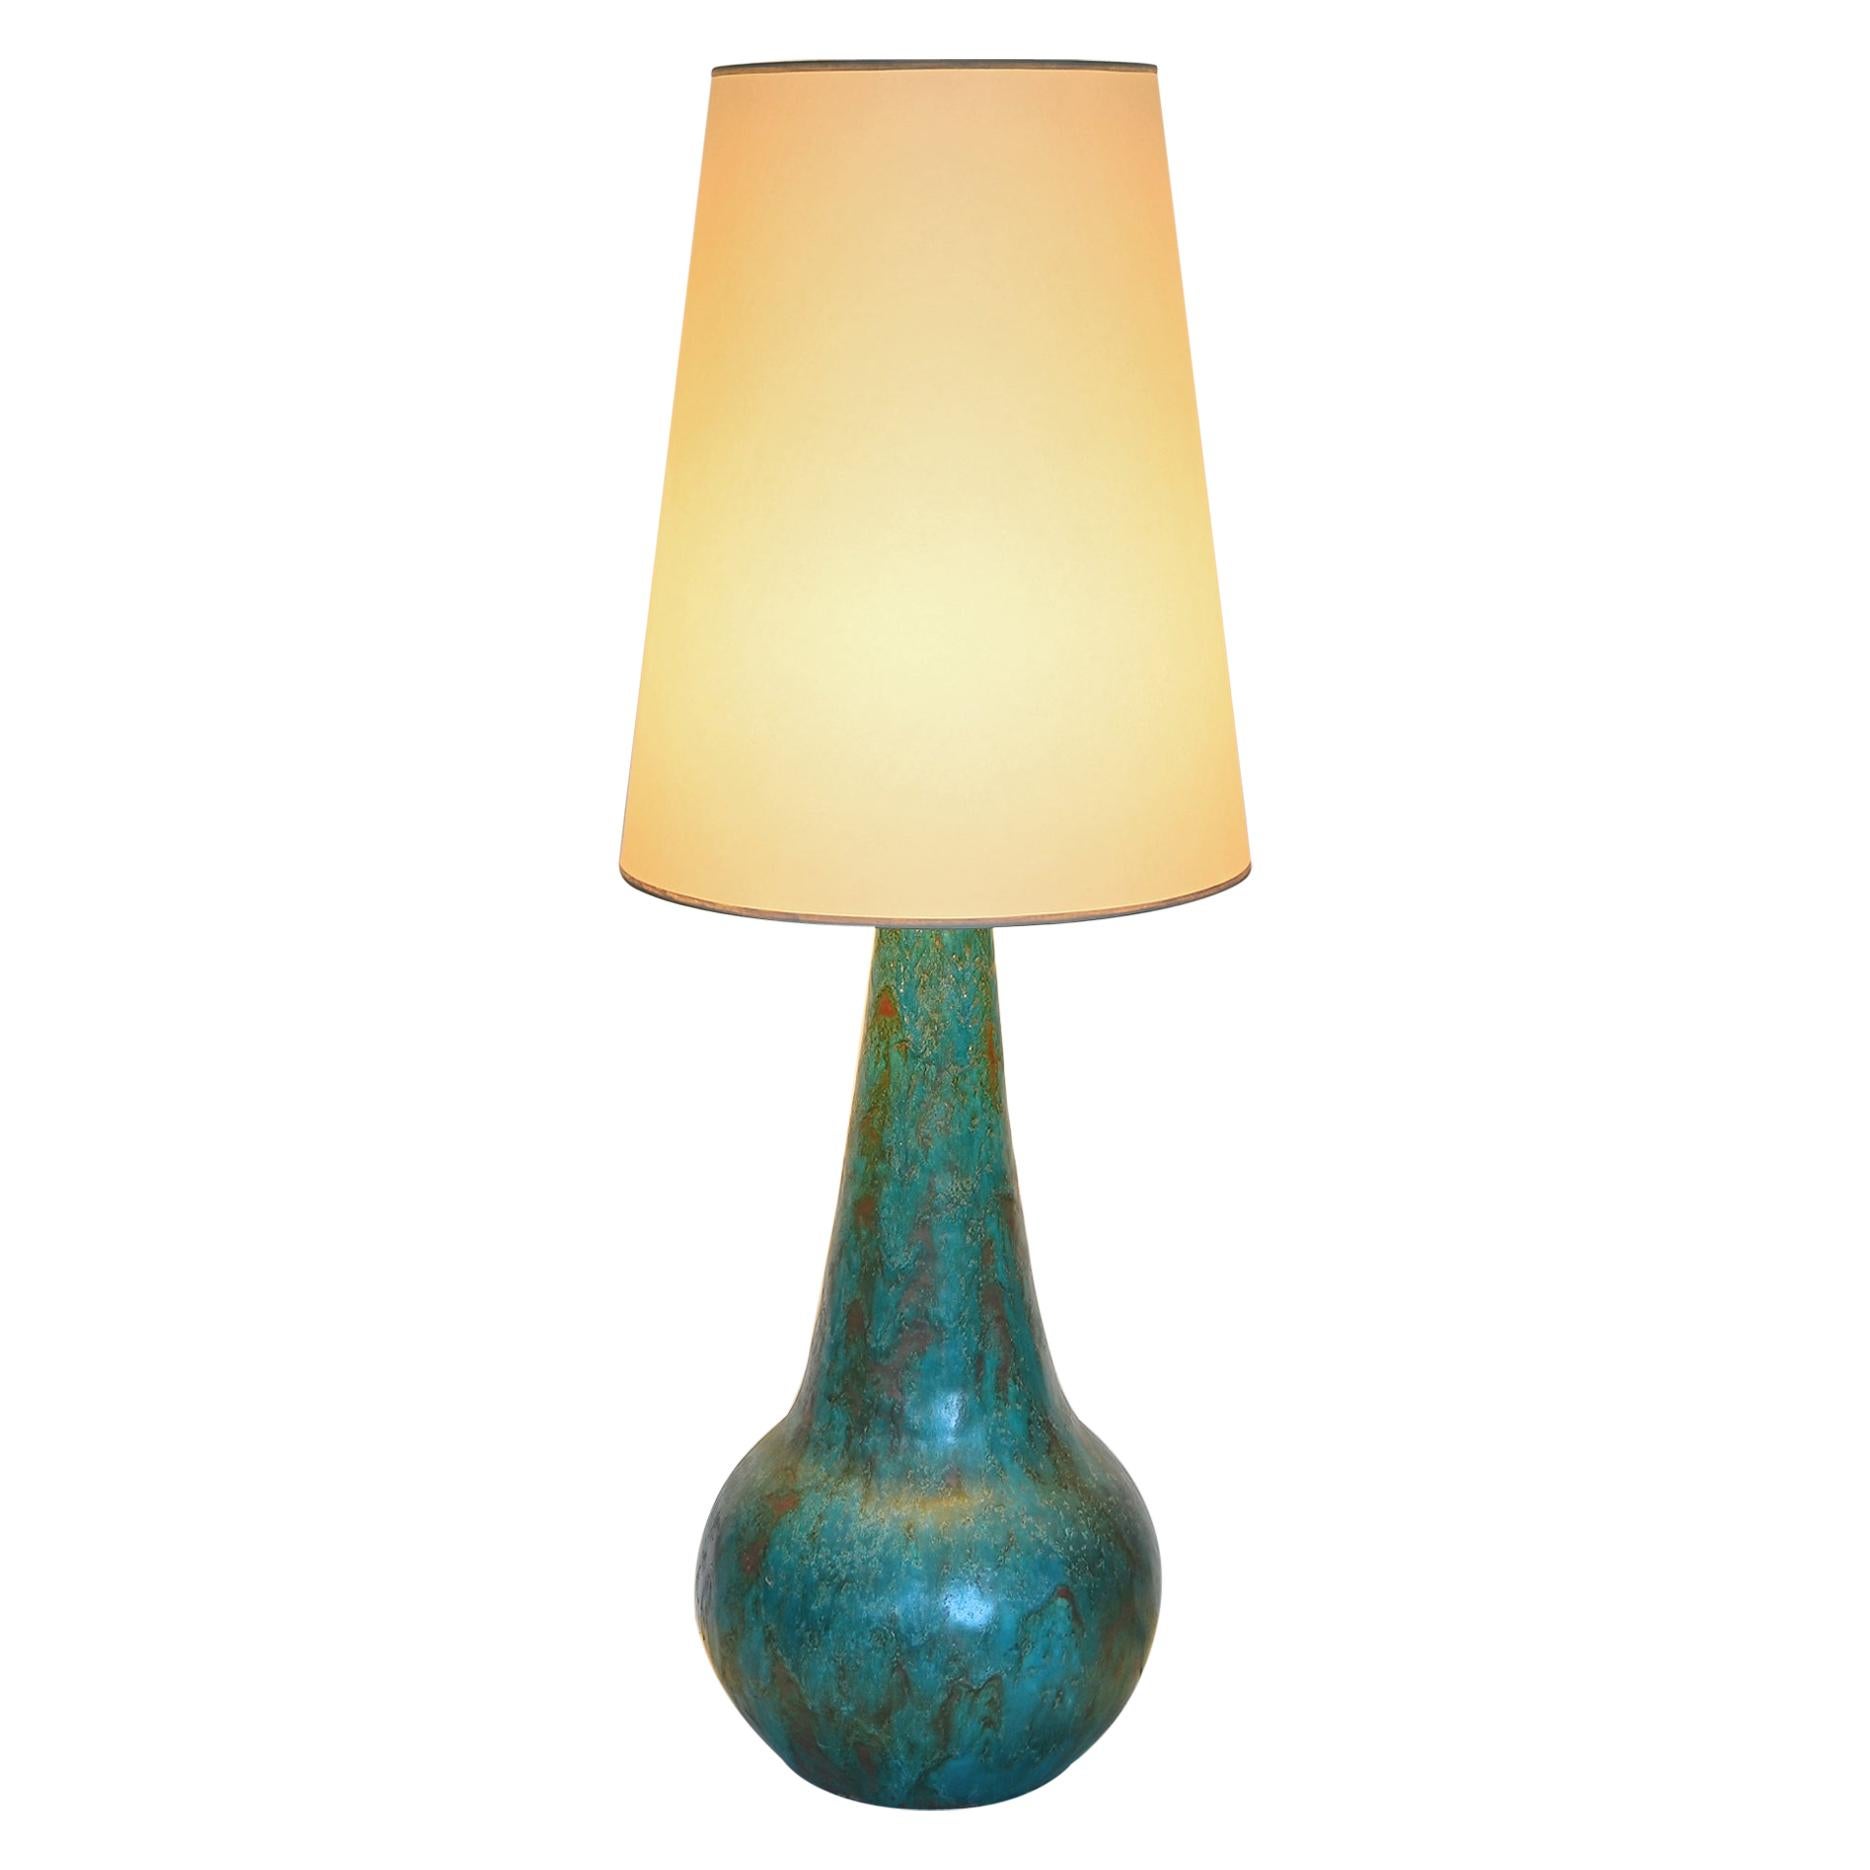 Pottery Blue Handcrafted Table Lamp German 1970 Adjustable Studio Lamp For Sale